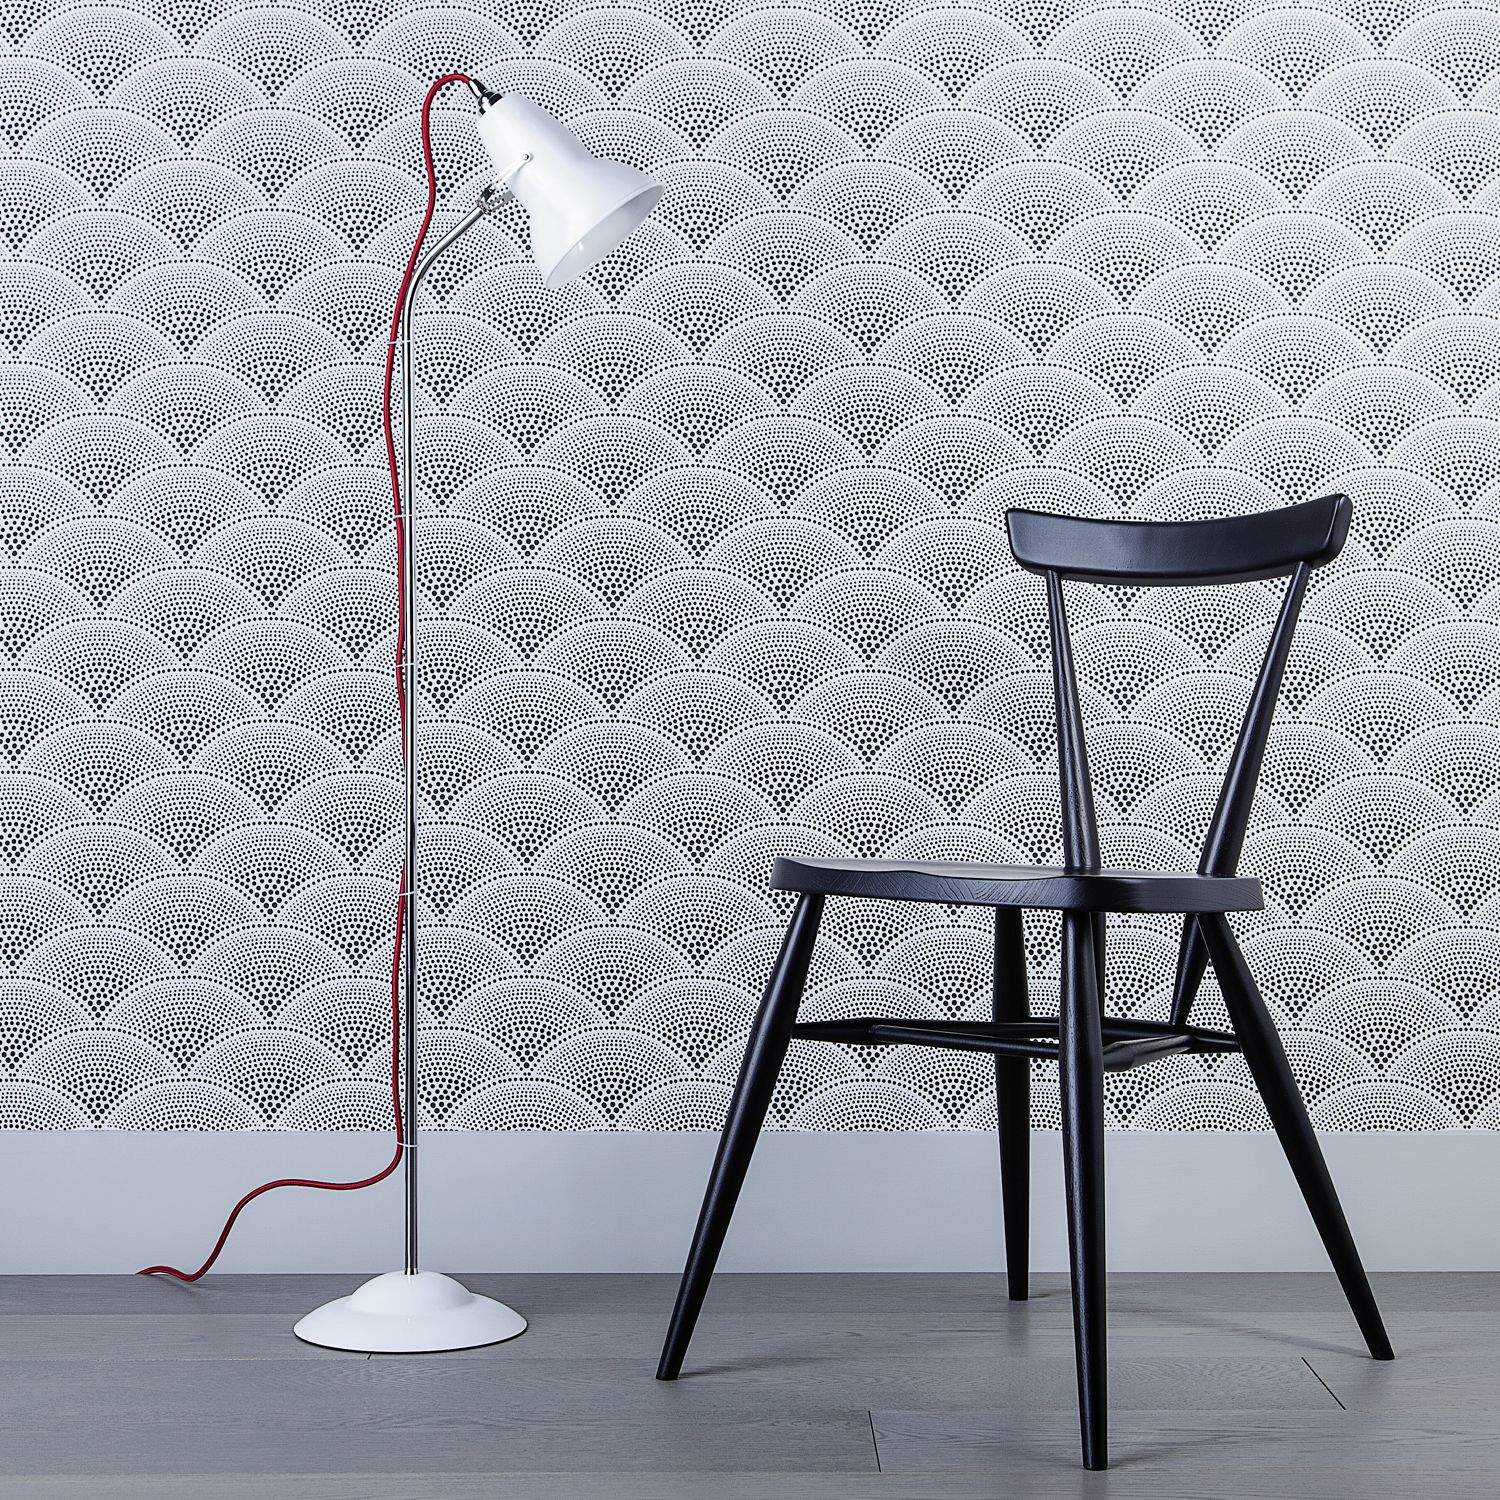 Anglepoise Duo Floor Lamp At John Lewis Partners